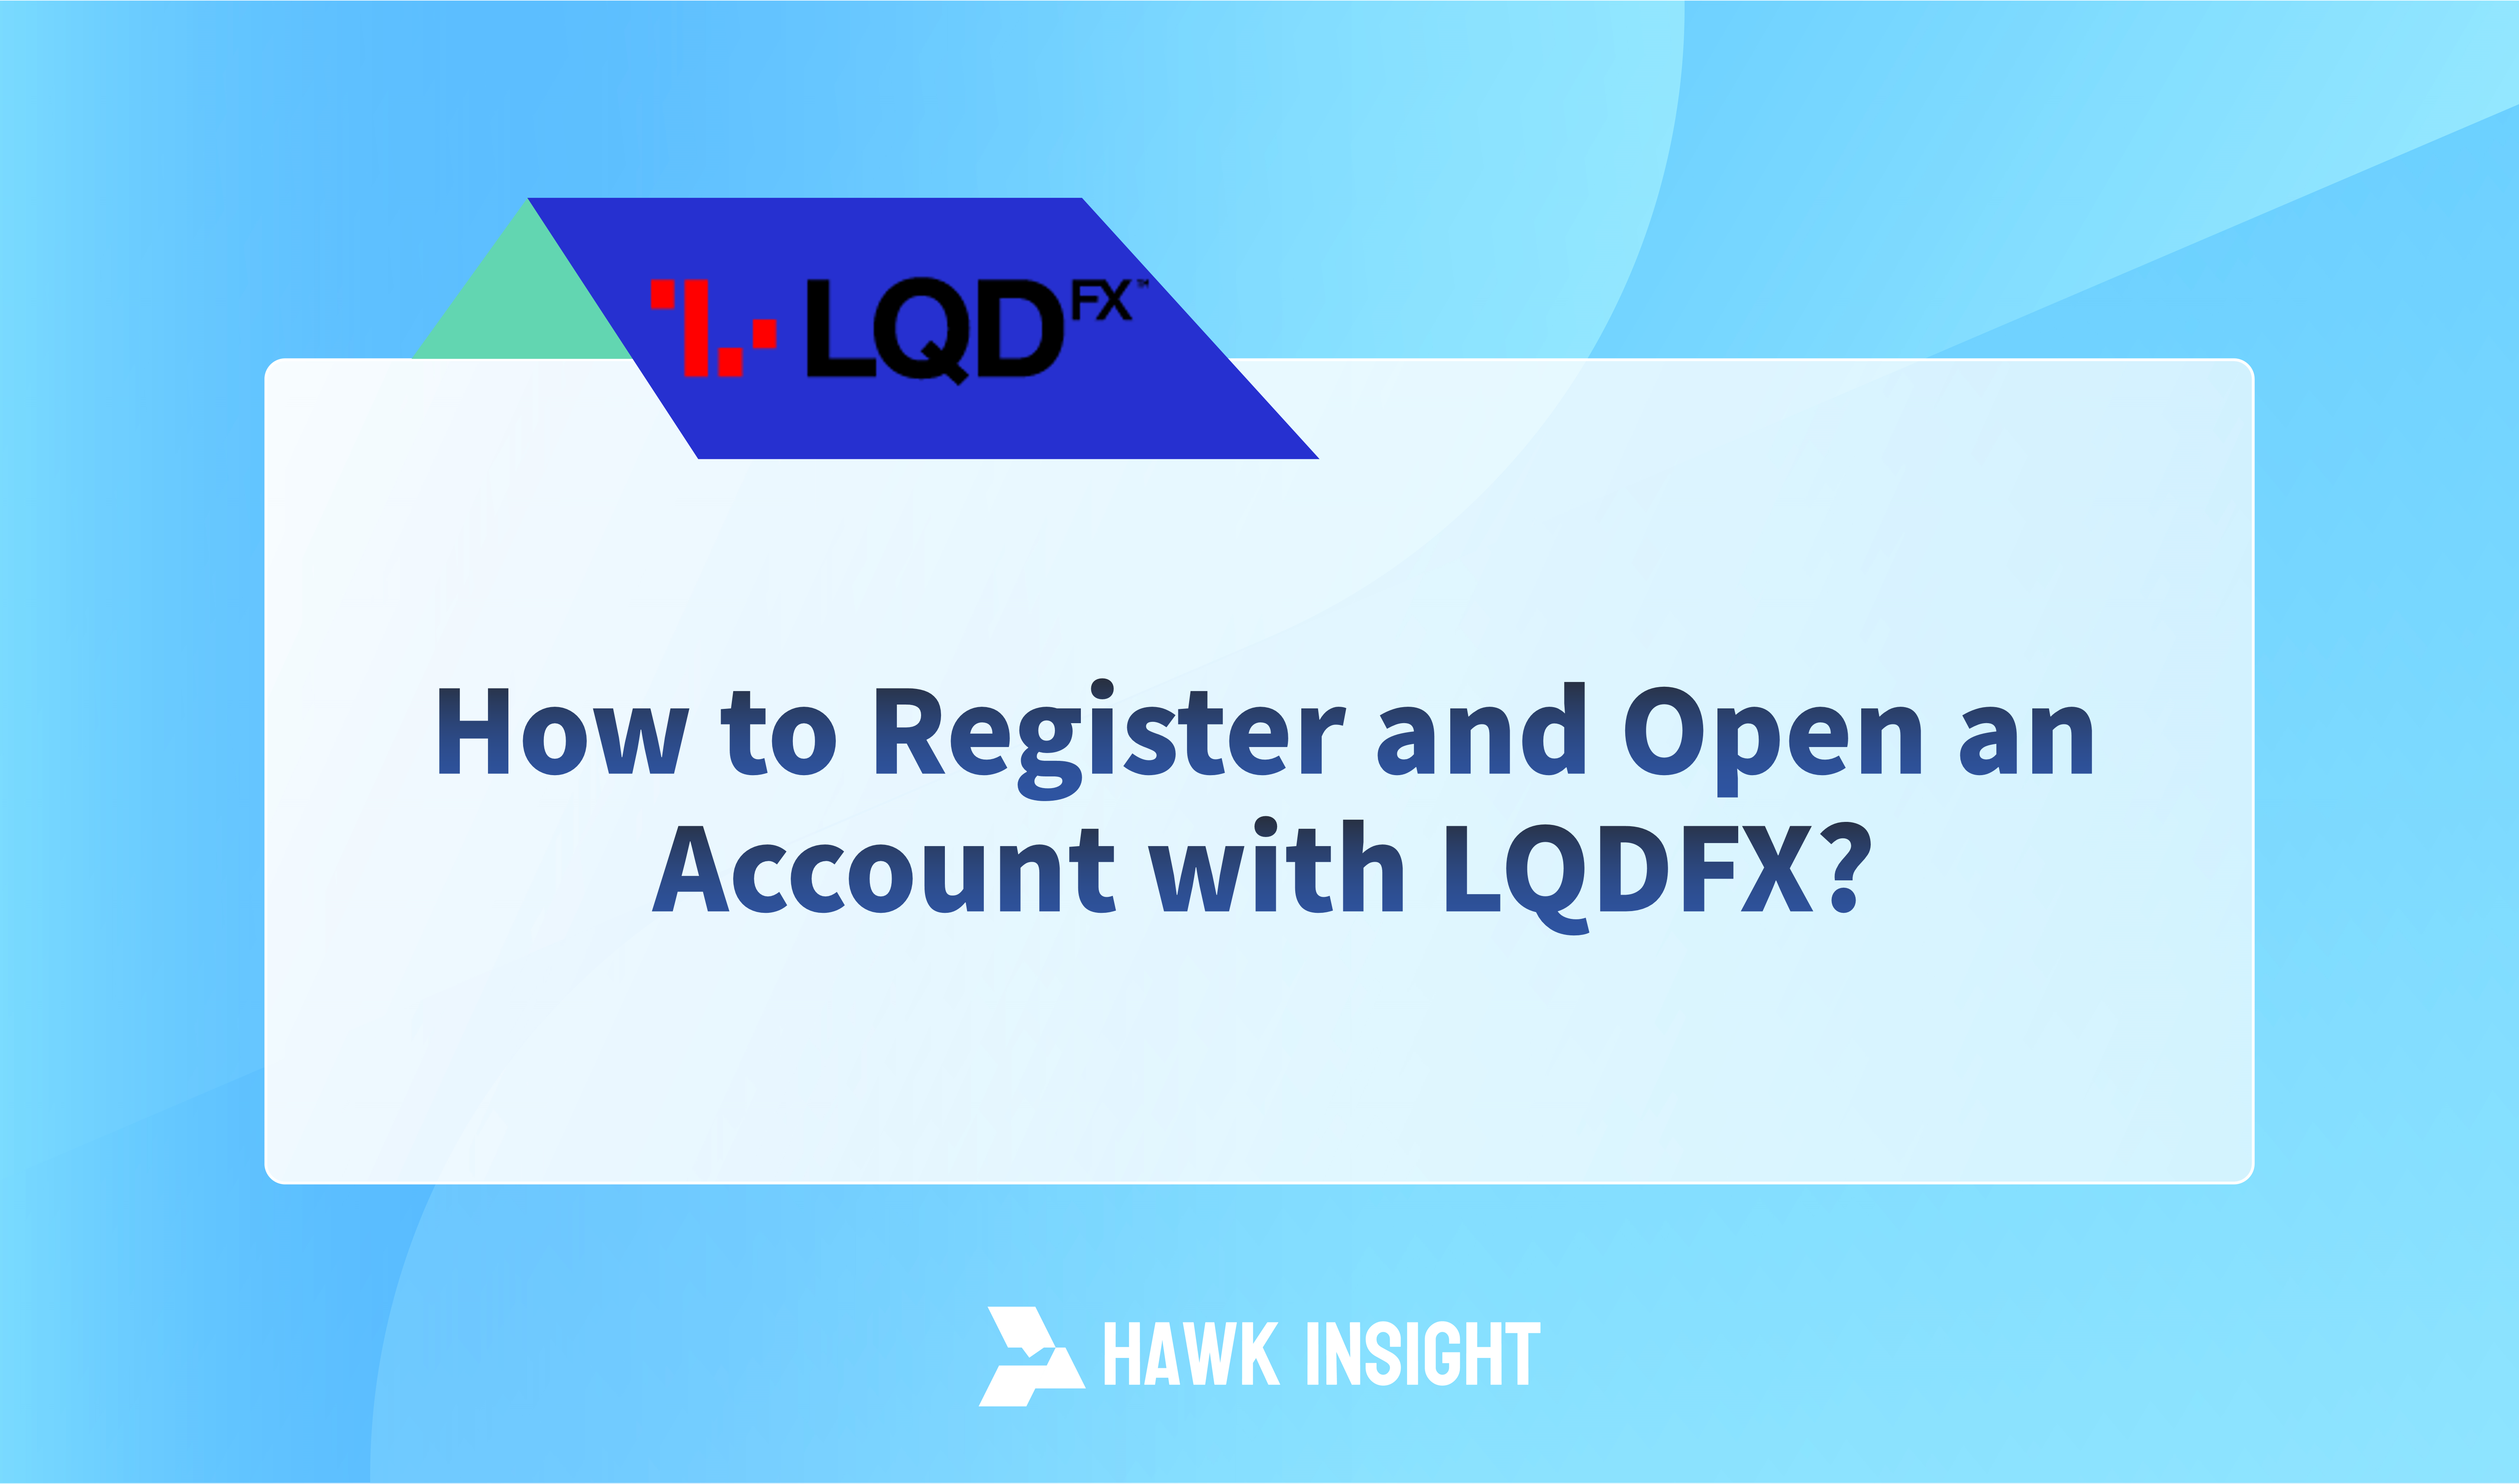 How to Register and Open an Account with LQDFX?